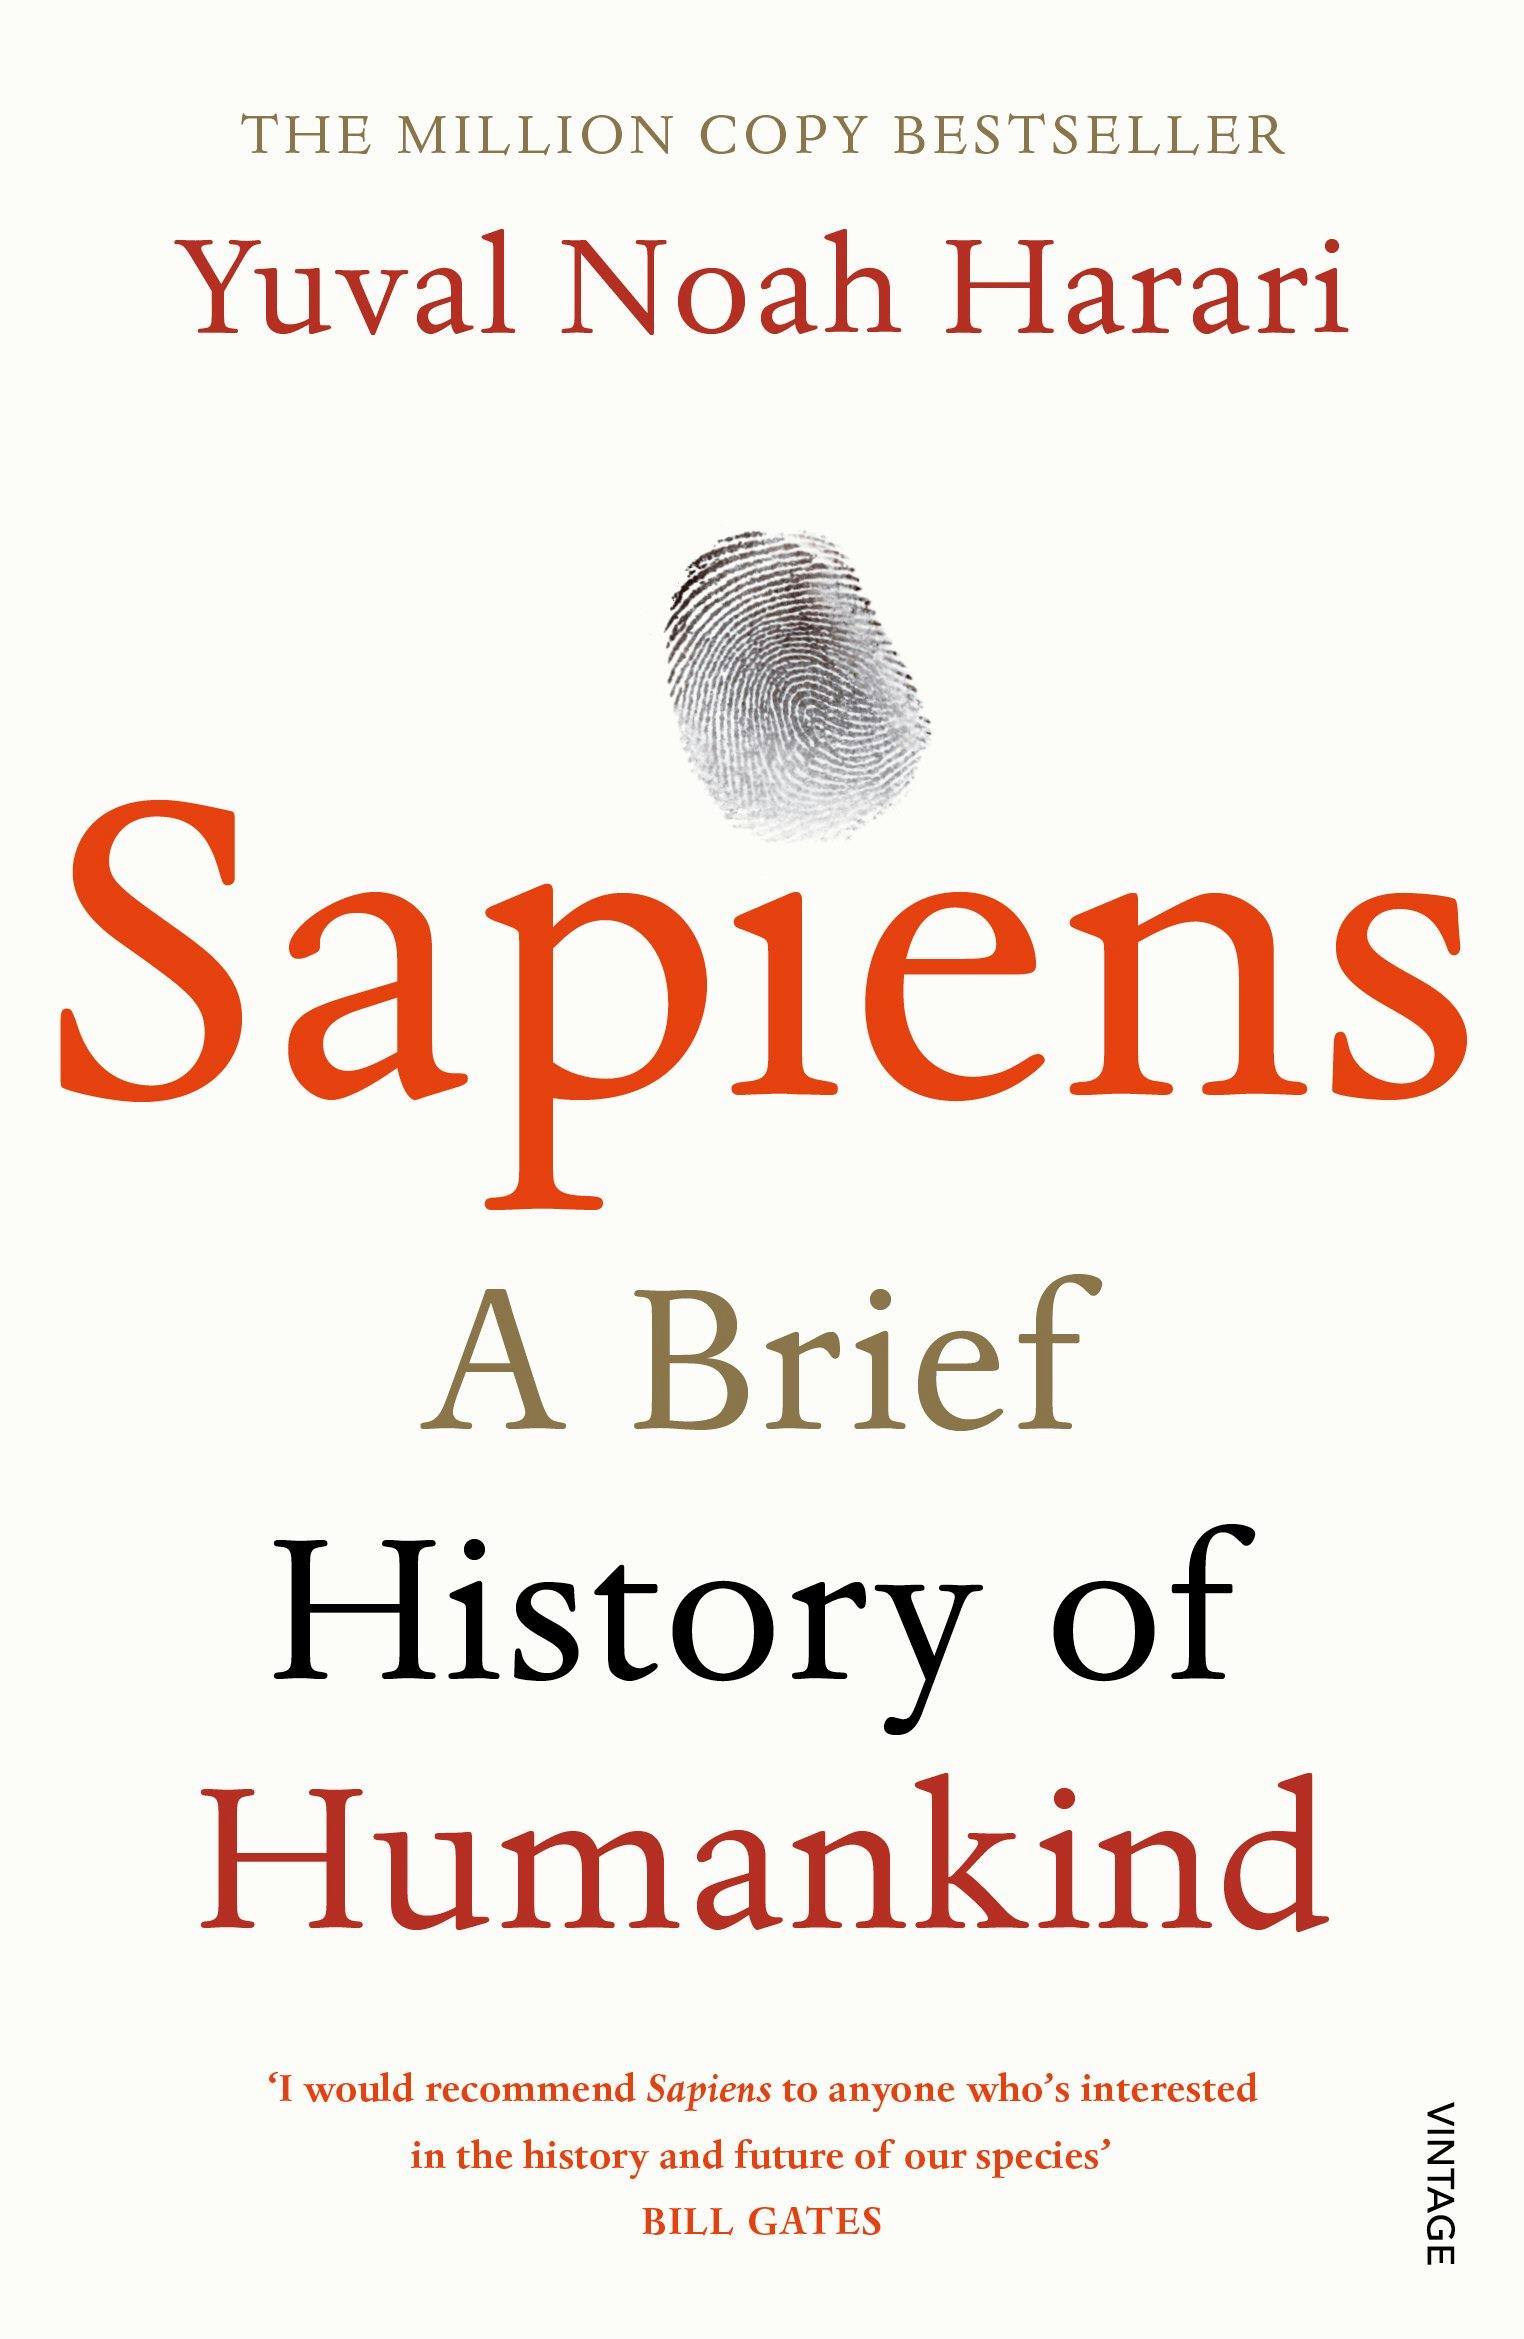 The media cover for “Sapiens: A Brief History of Humankind” by Yuval Noah Harari